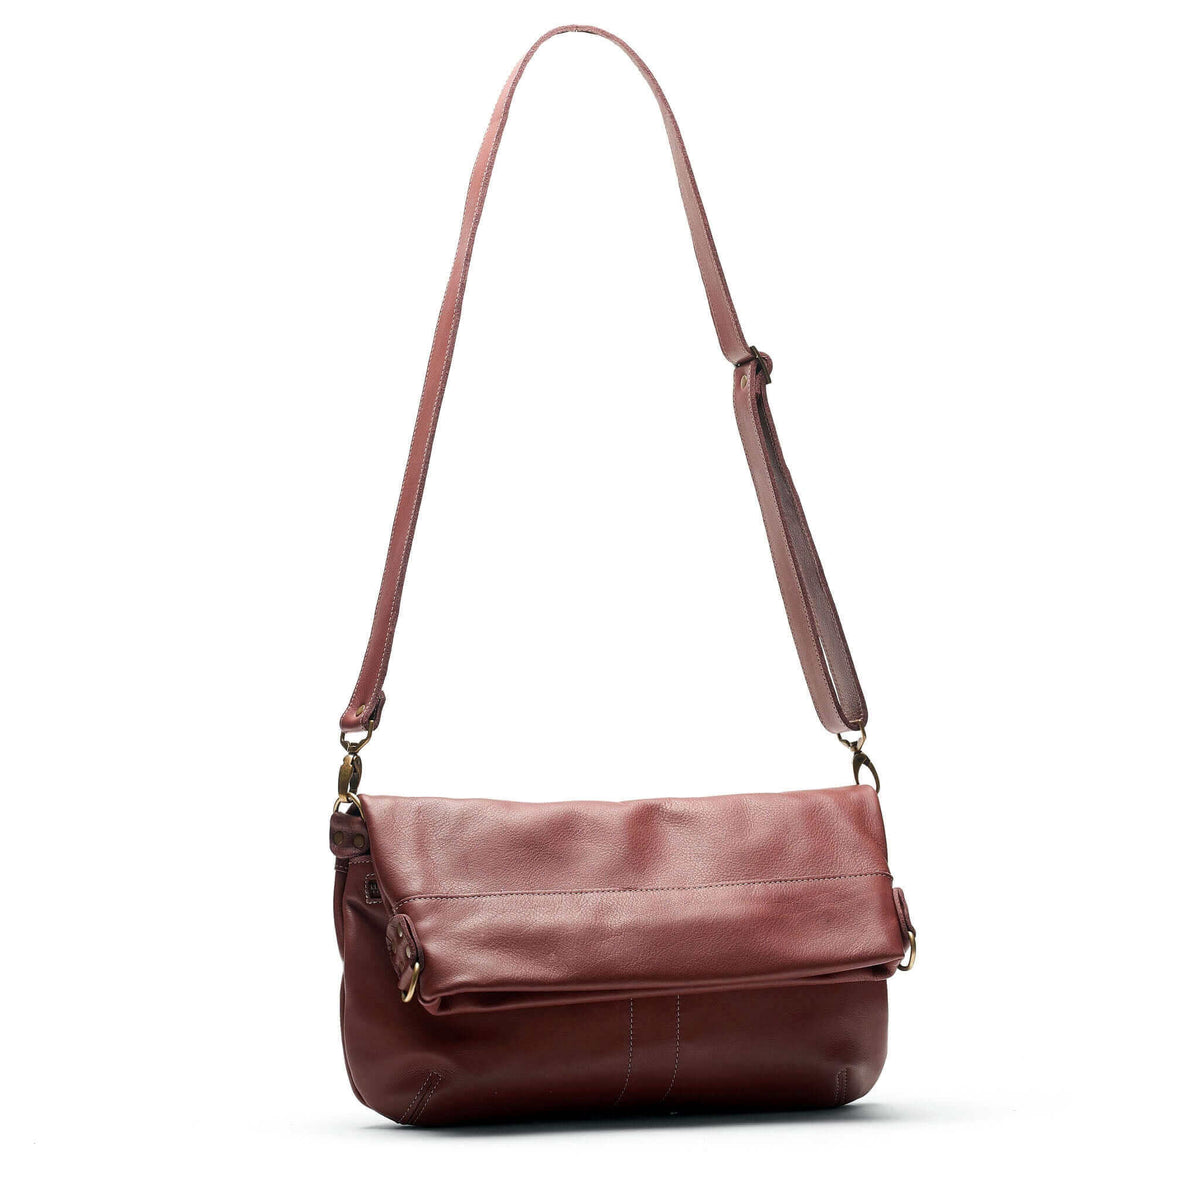 Wine Brown leather 6-in-1 convertible backpack crossbody, Brynn Capella, made in the USA